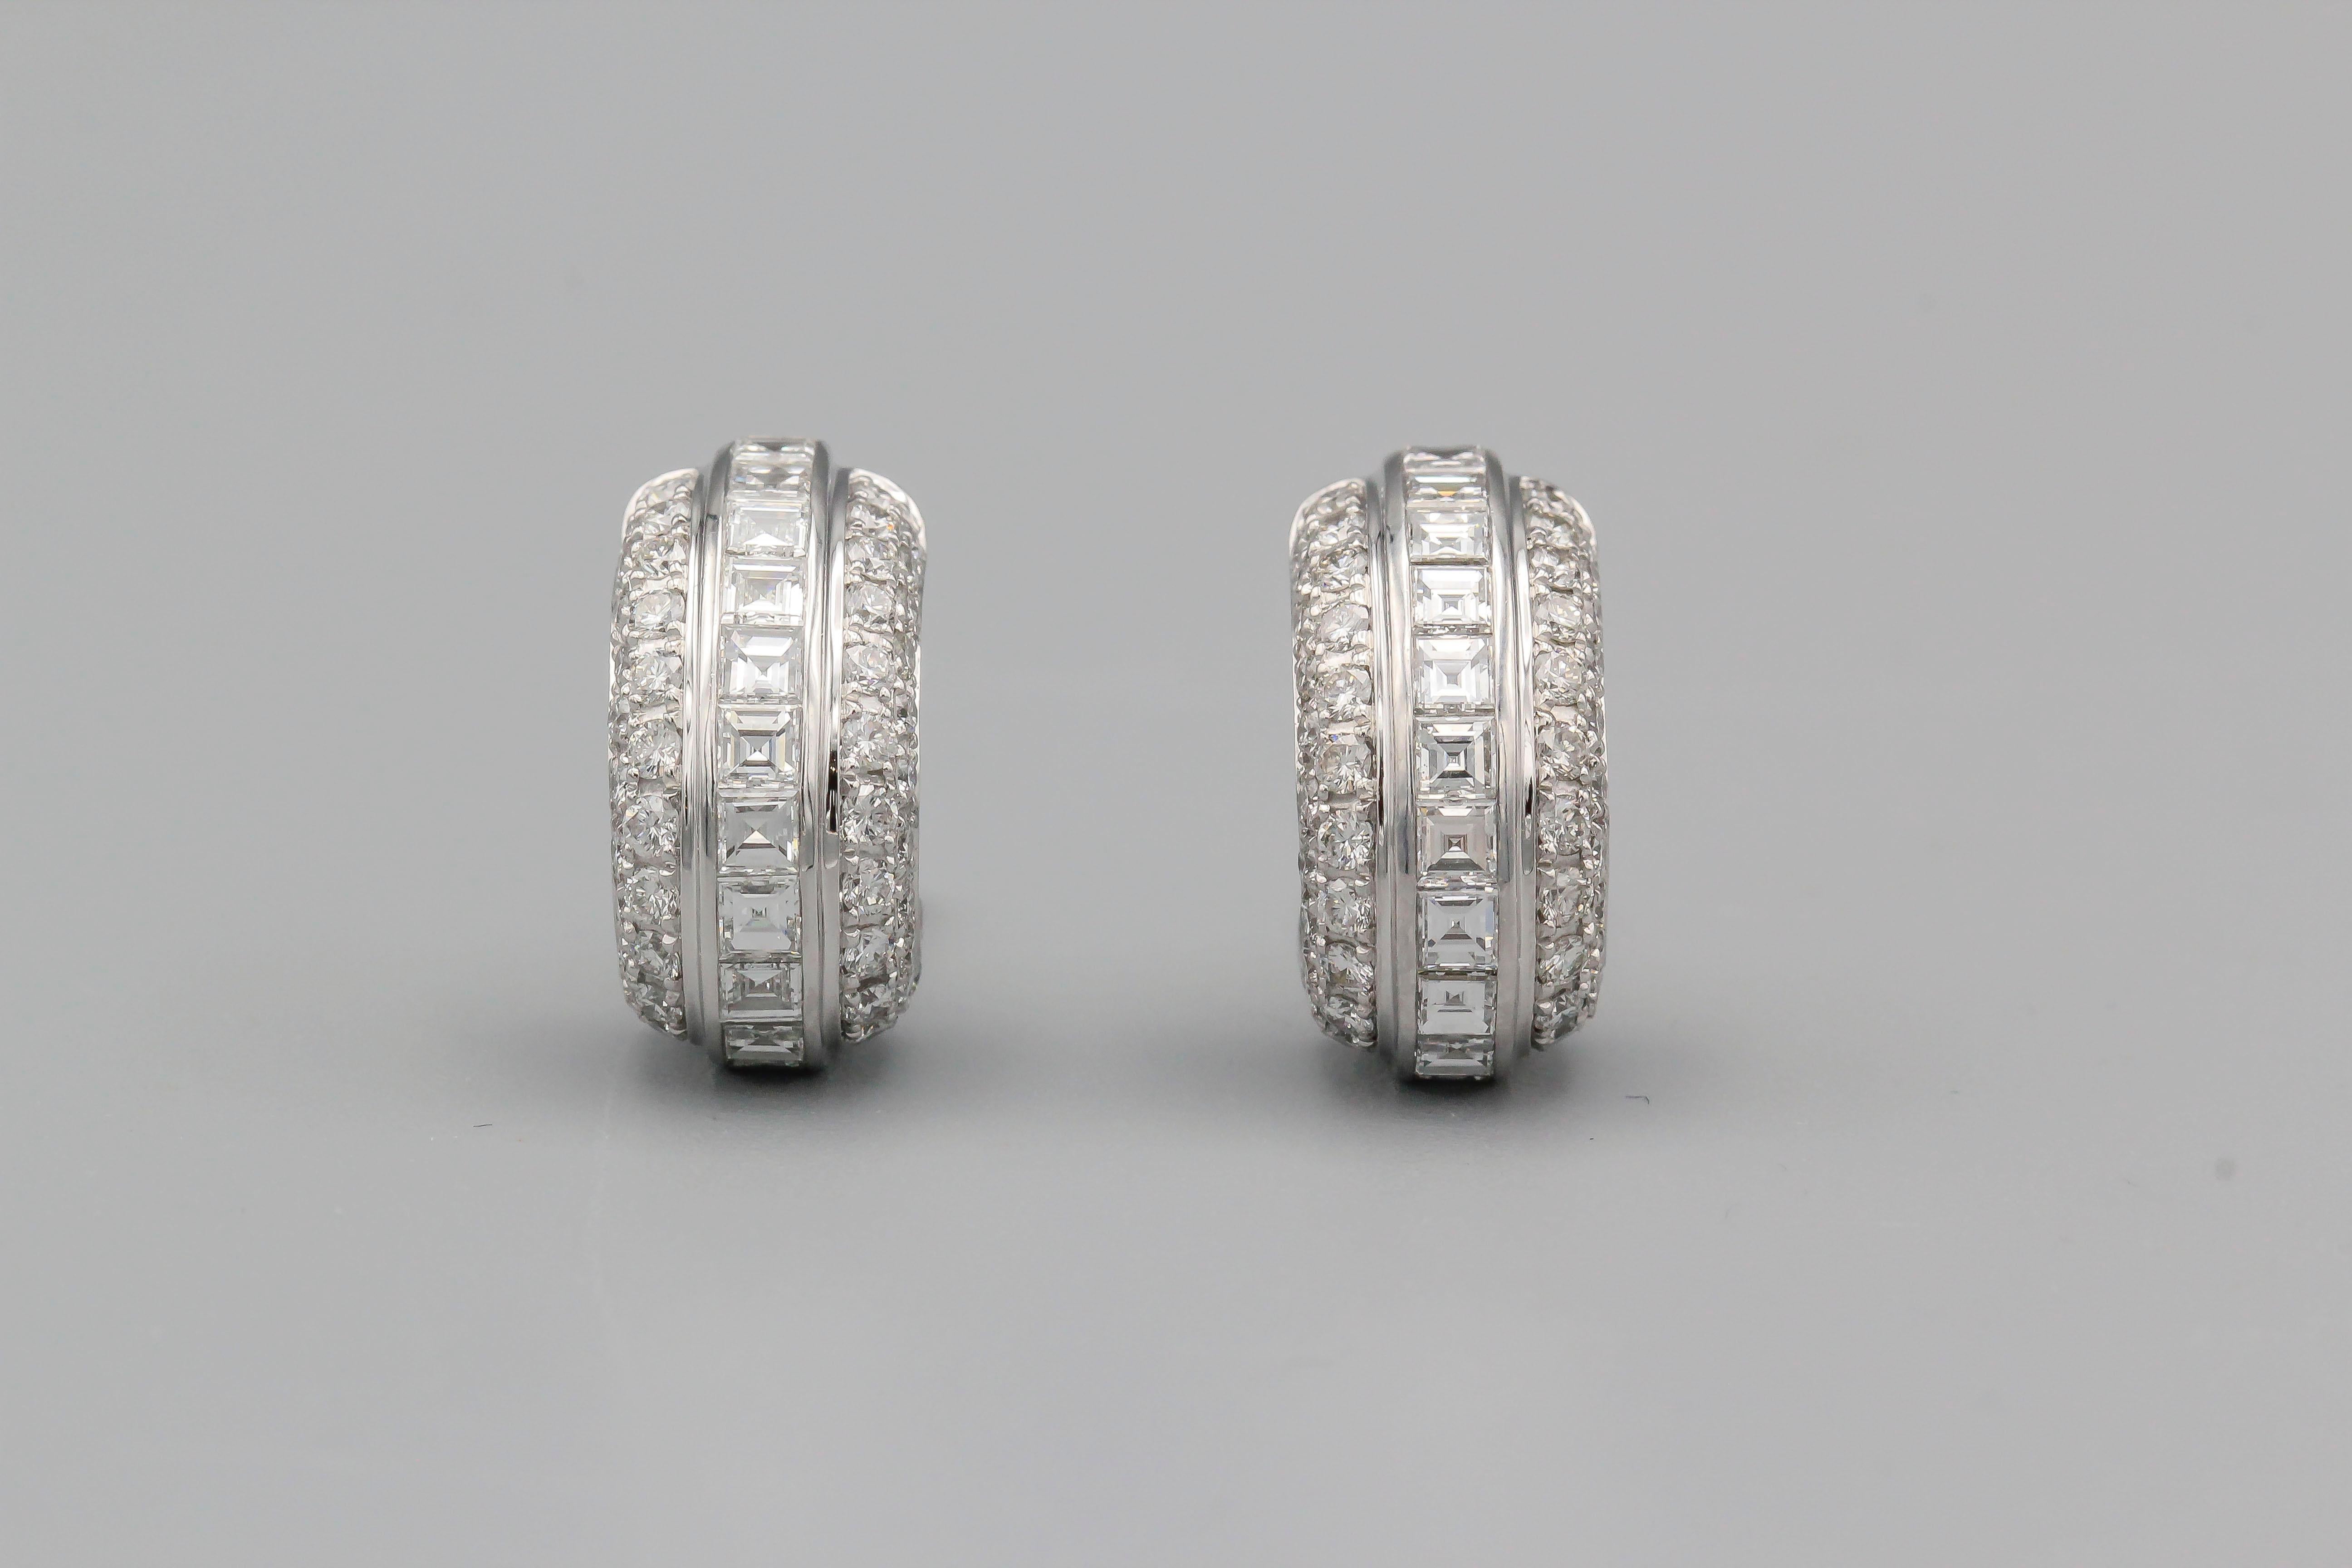 Fine pair of diamond and 18K white gold hoop earrings by Piaget. They feature high grade round and square step cut diamonds of F-G color and VVs clarity, approx. 4 carats total weight.

Hallmarks: 750, Piaget, reference numbers, maker's mark.